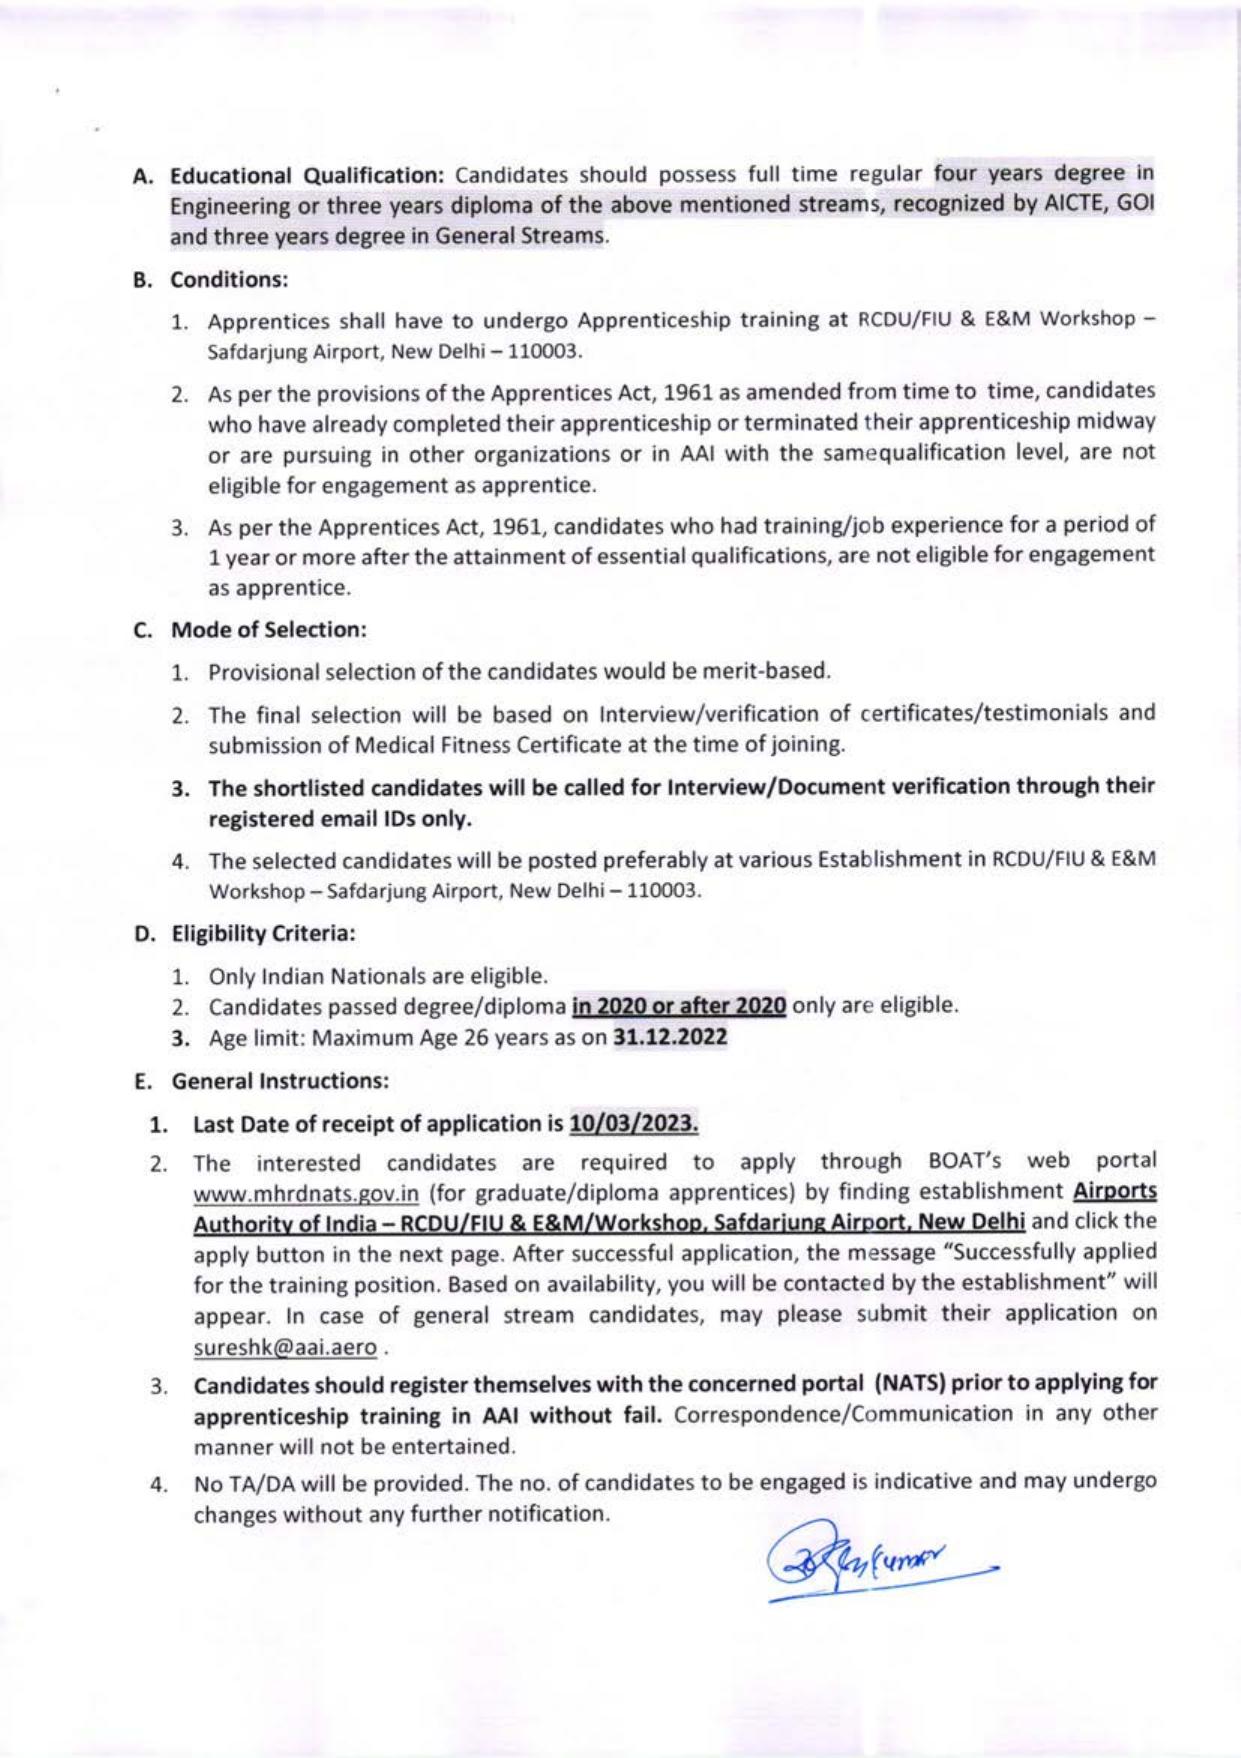 Airports Authority of India Invites Application for 10 Graduate Apprentice or Diploma Apprentices Recruitment 2023 - Page 2